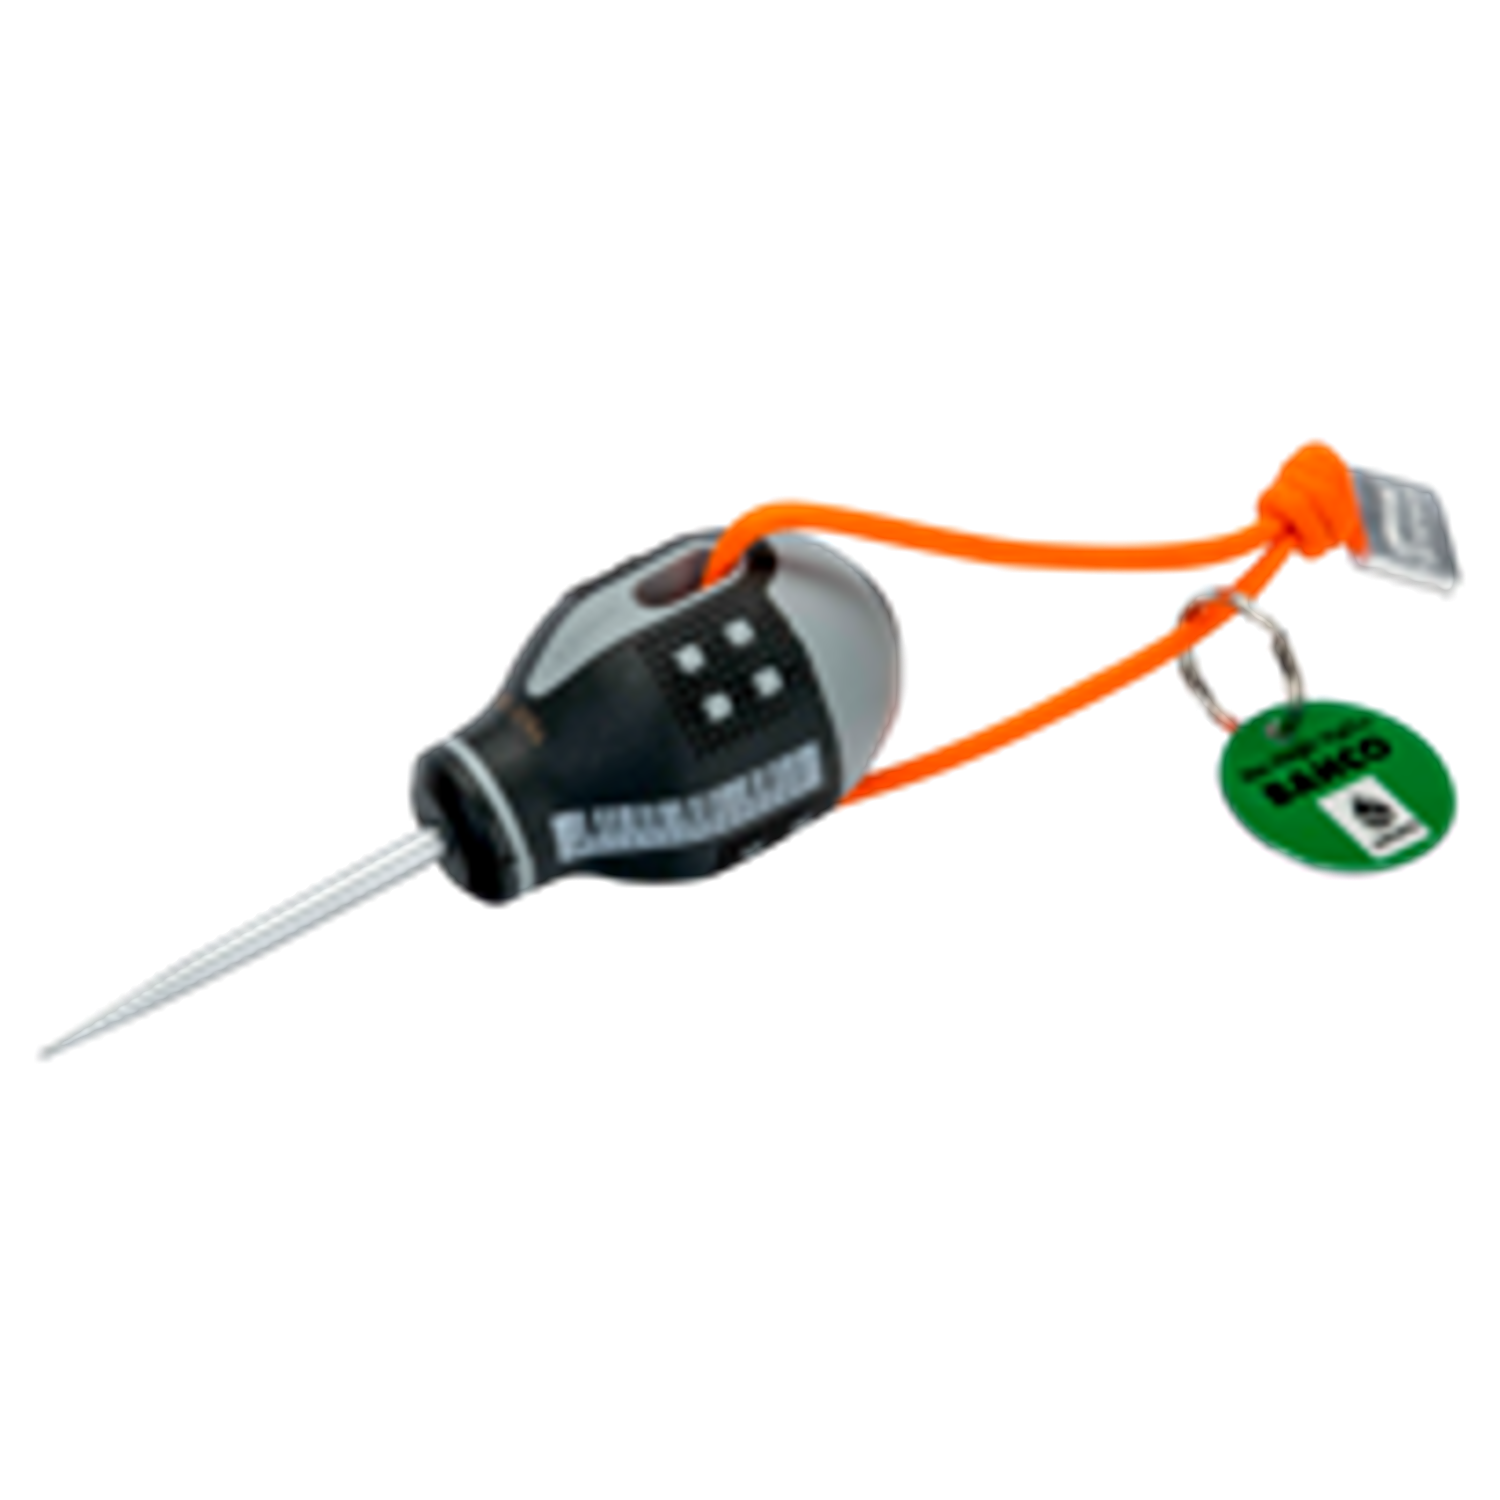 BAHCO TAHPINRELEASER Stubby Screwdriver Pin Releaser TAH Socket - Premium Stubby Screwdriver from BAHCO - Shop now at Yew Aik.